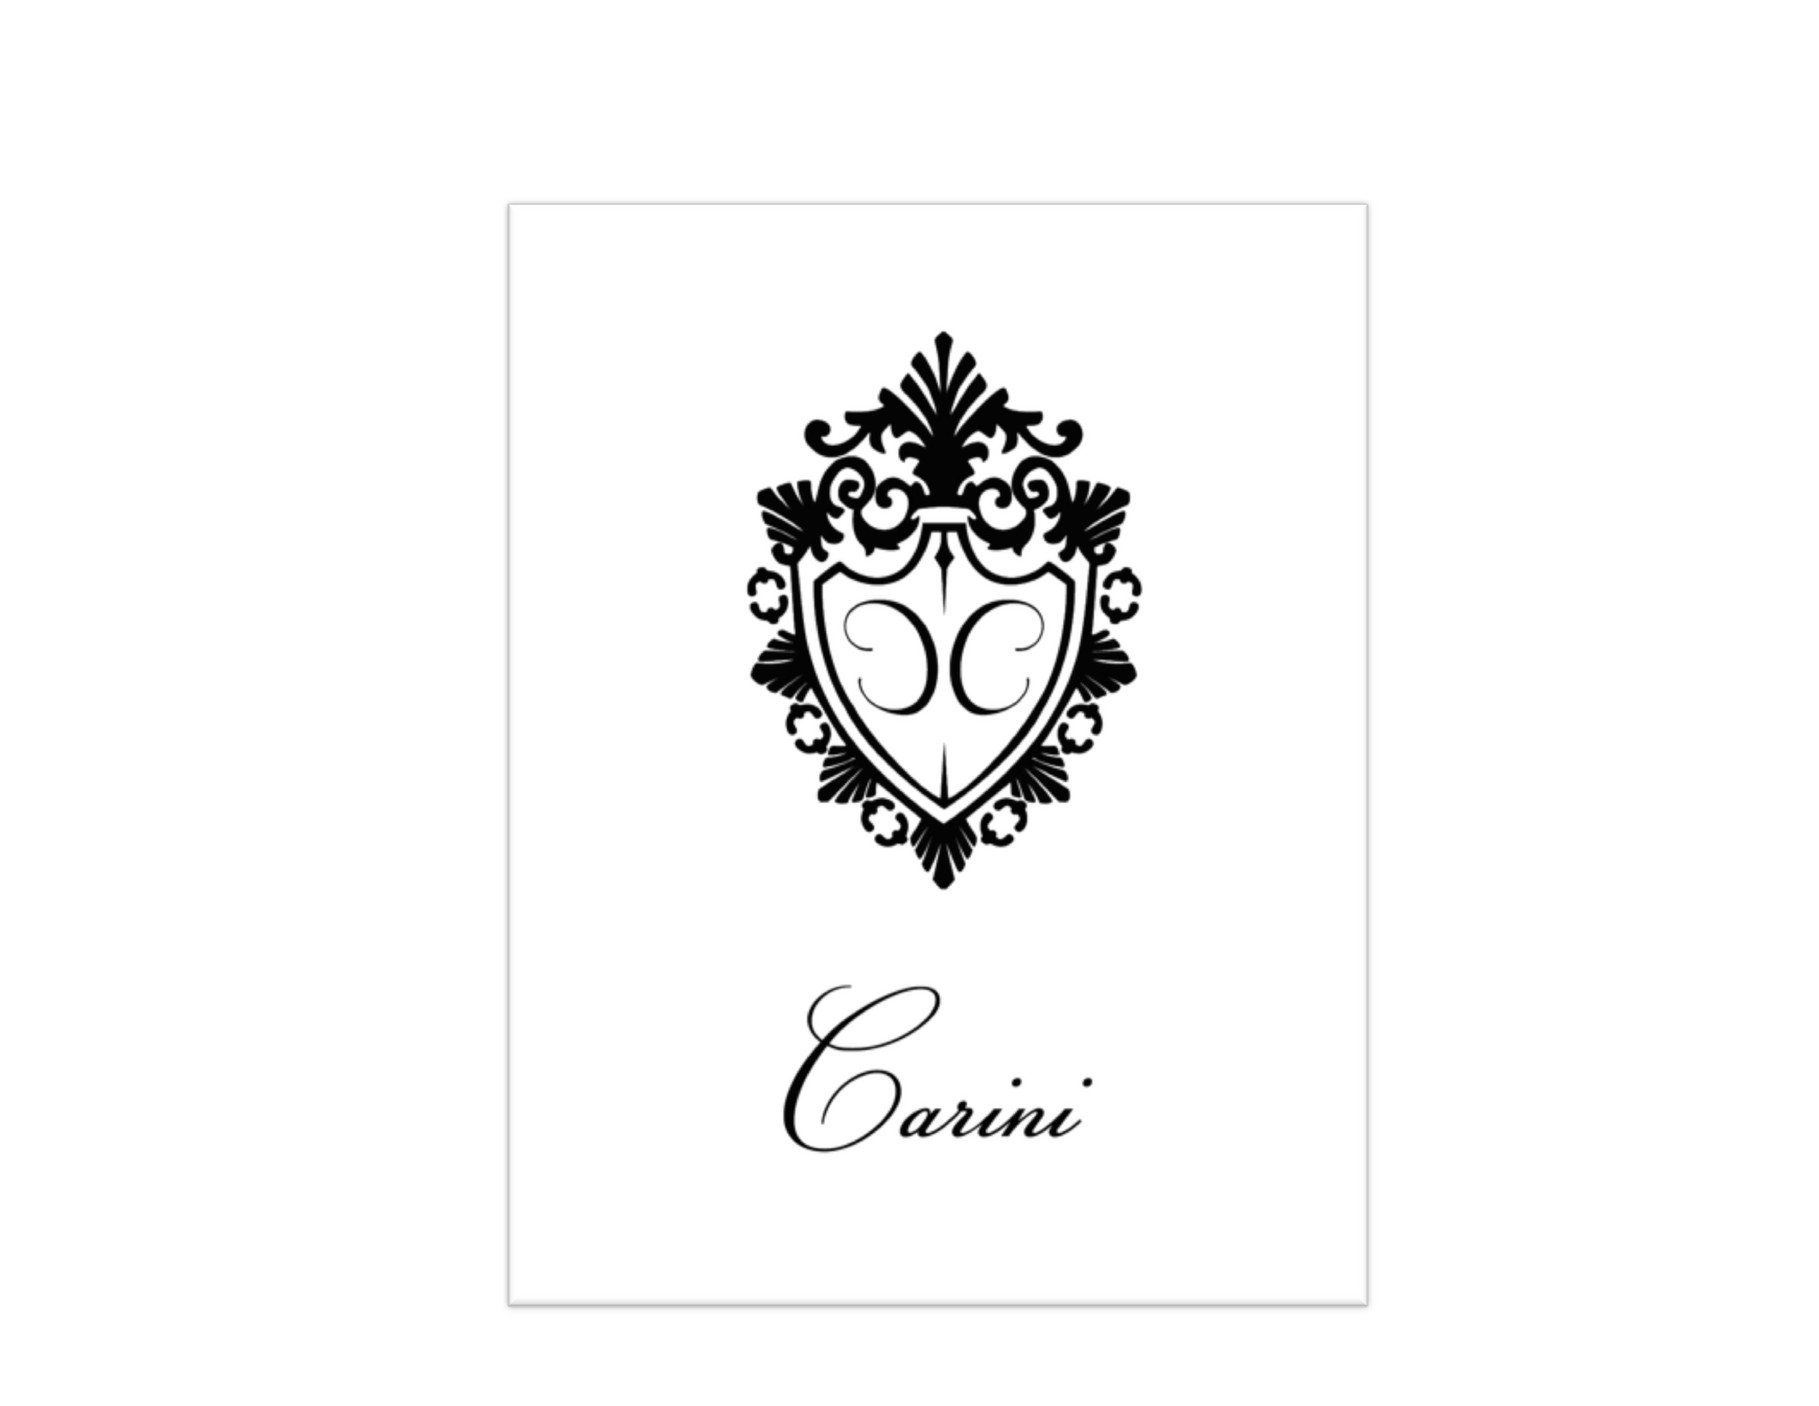 cds-carini-di-sartoriale-beyond-bespoke-page-2-created-with